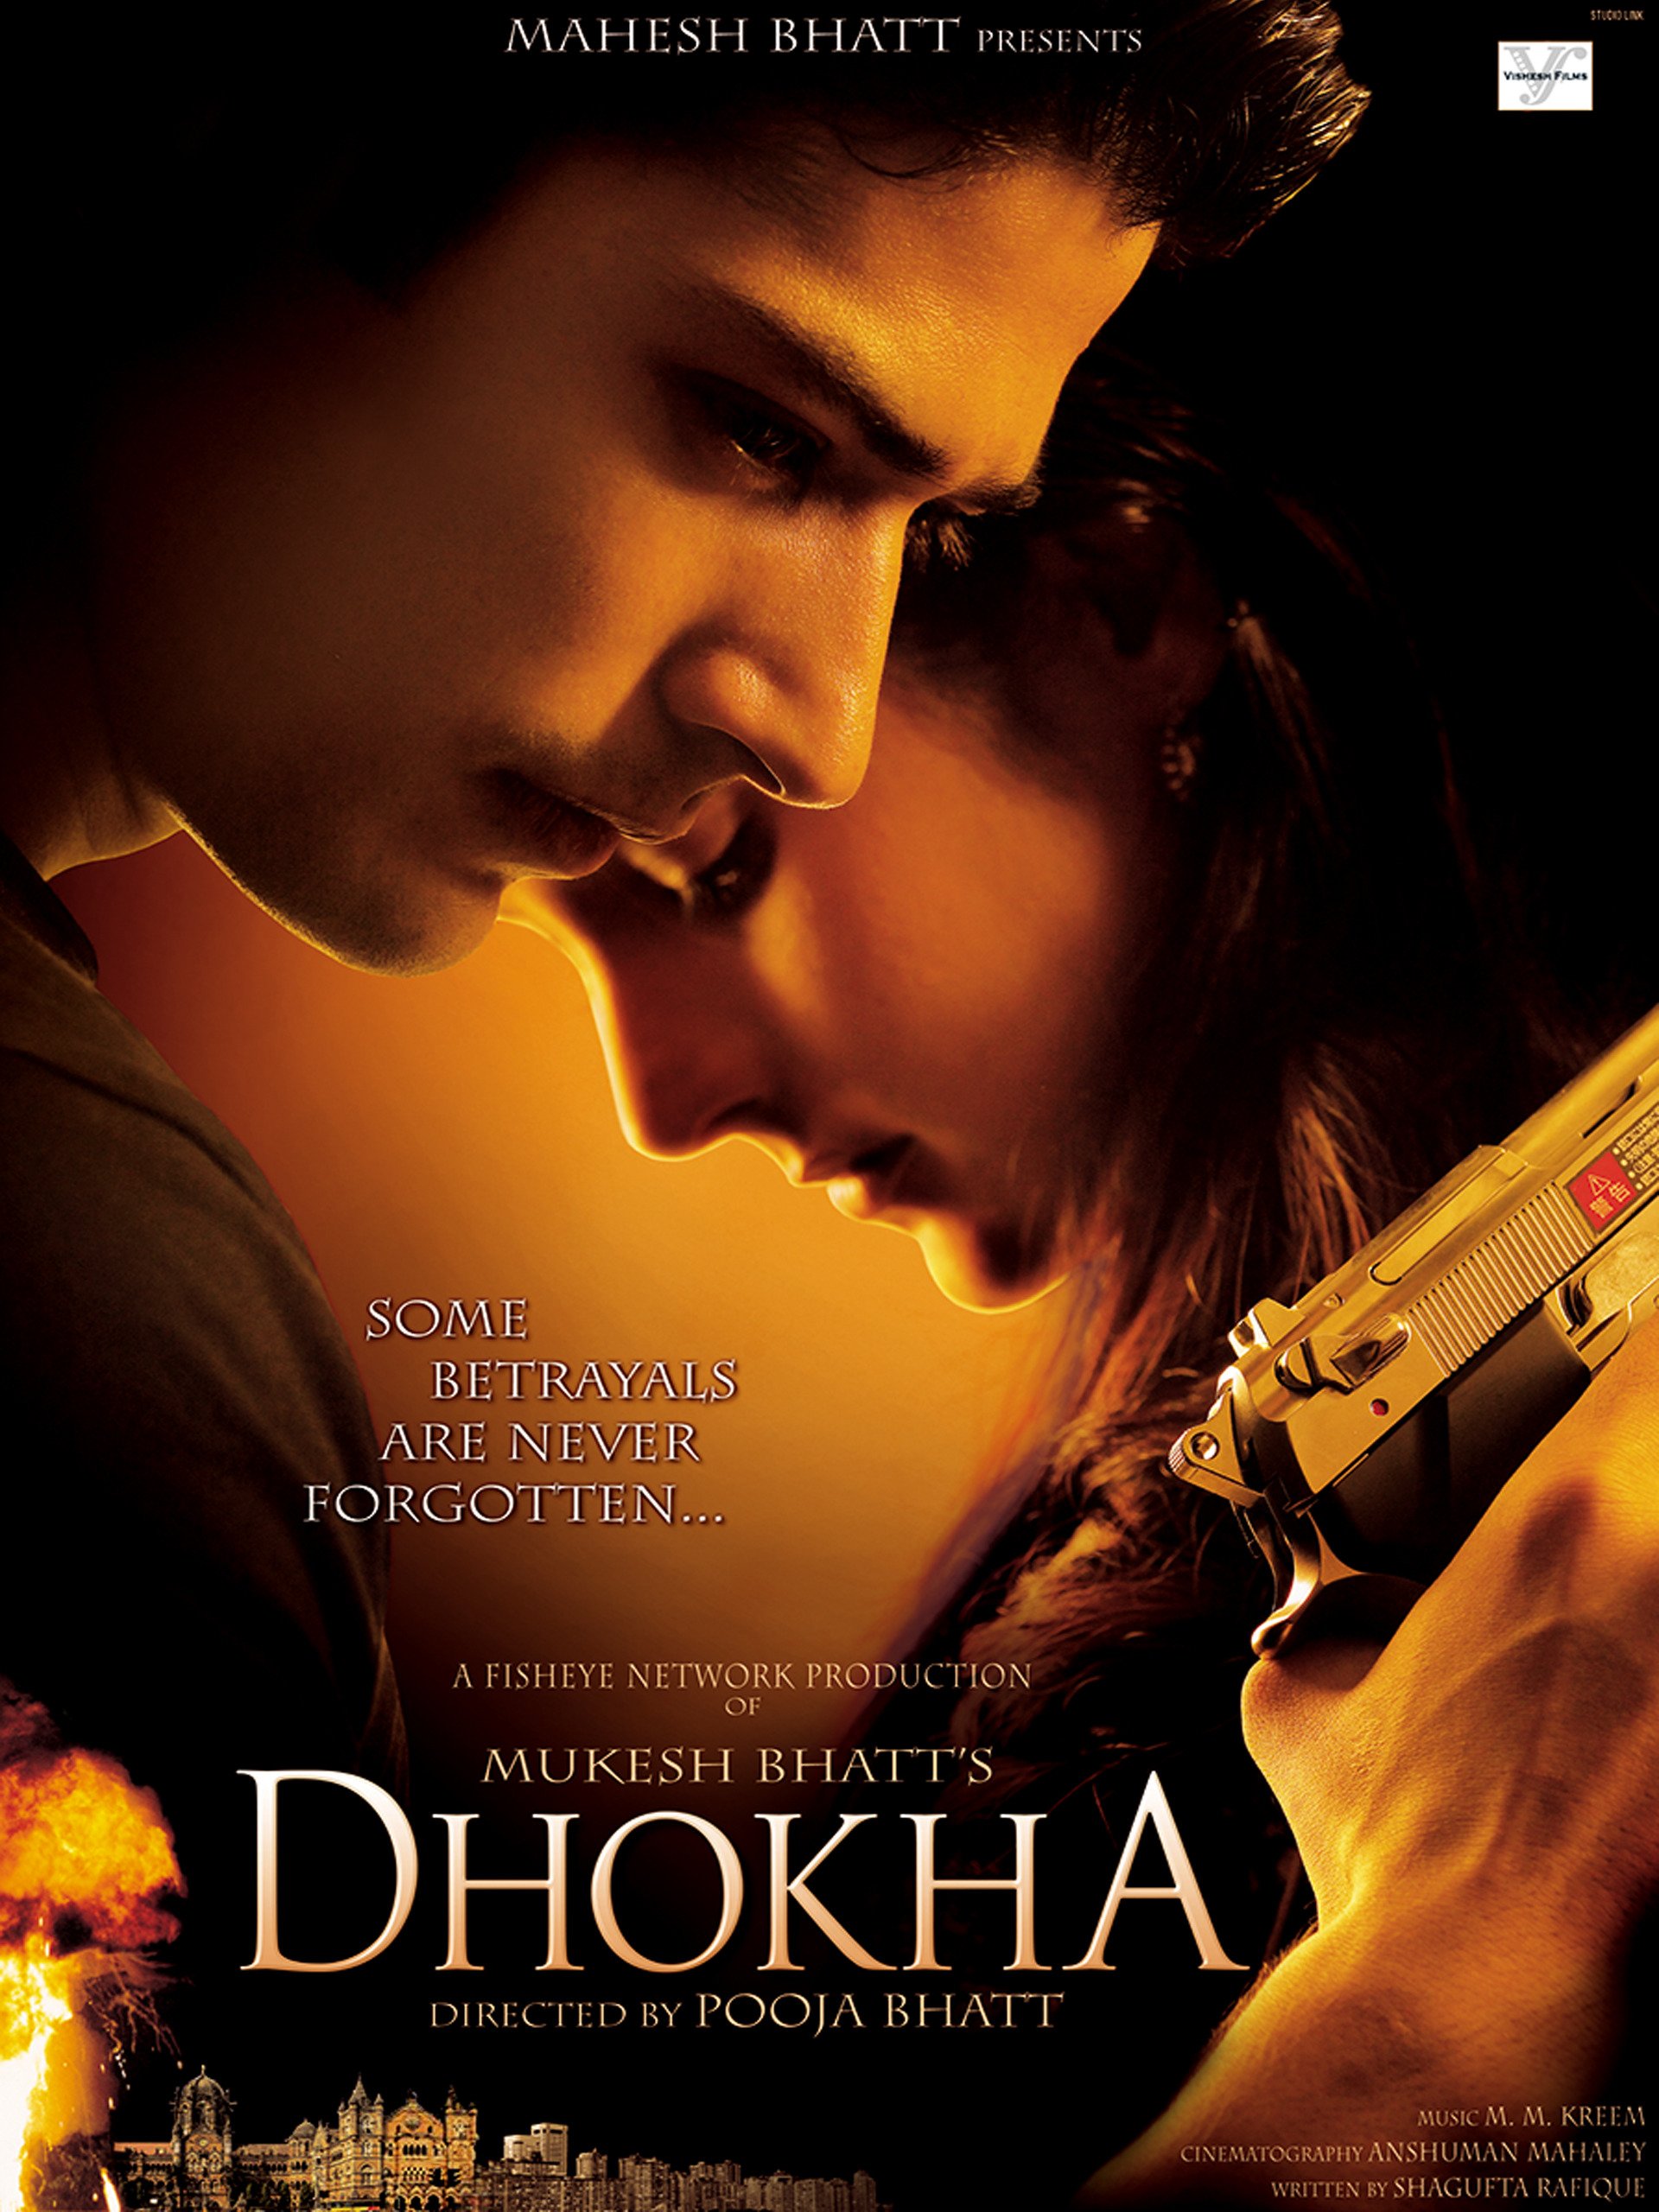 dhokha movie review in hindi